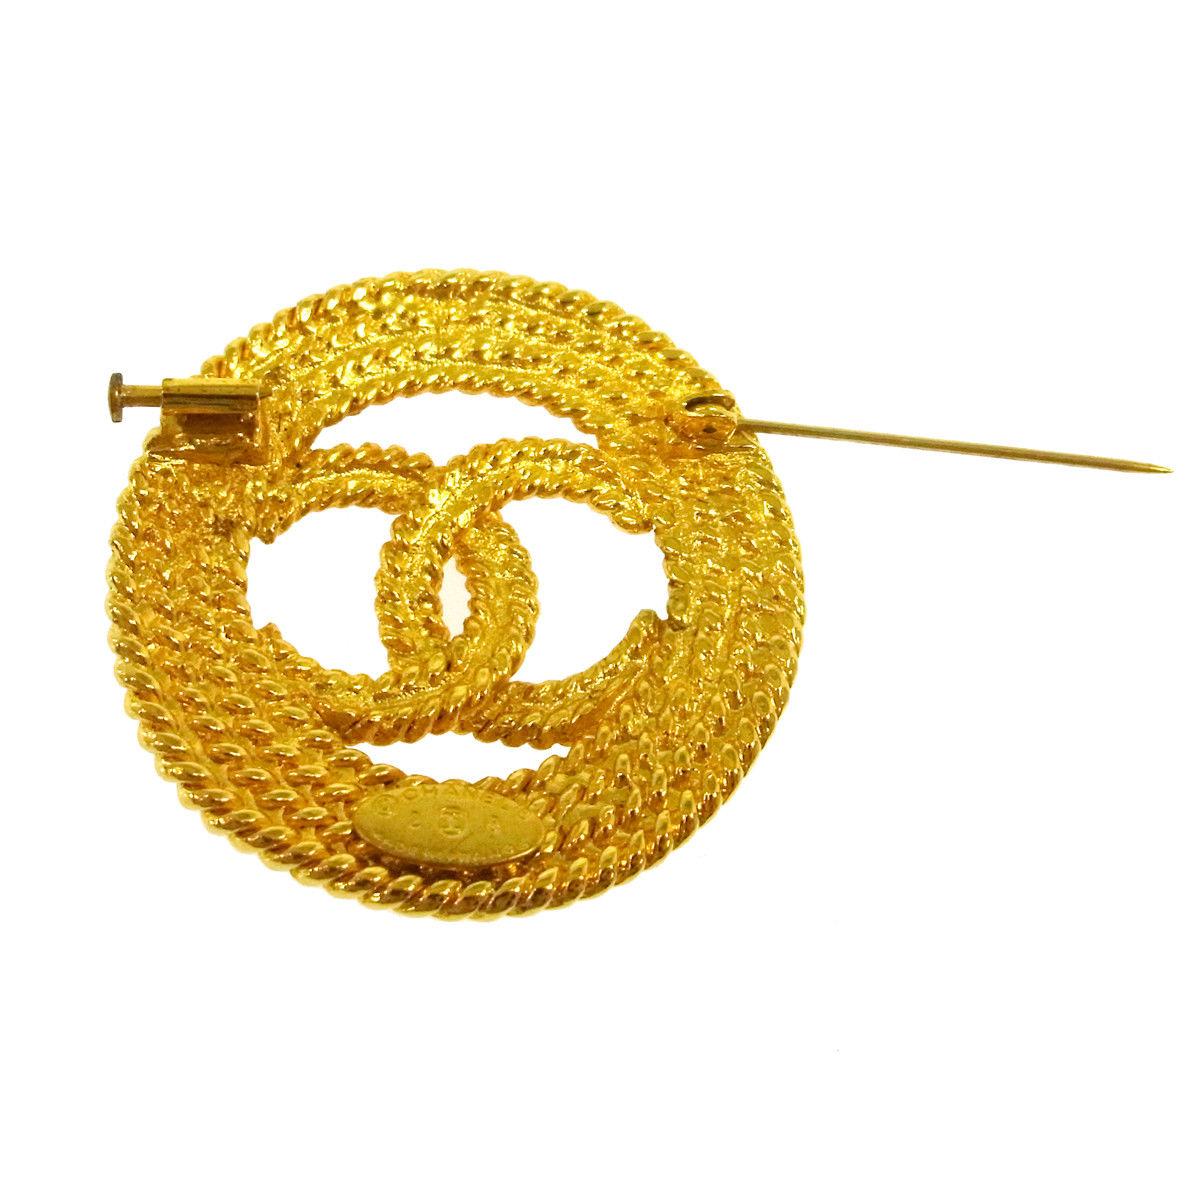 Chanel Vintage Gold Textured CC Logo Charm Button Pin Brooch 

Metal
Gold tone
Pin closure
Made in France
Measures 2